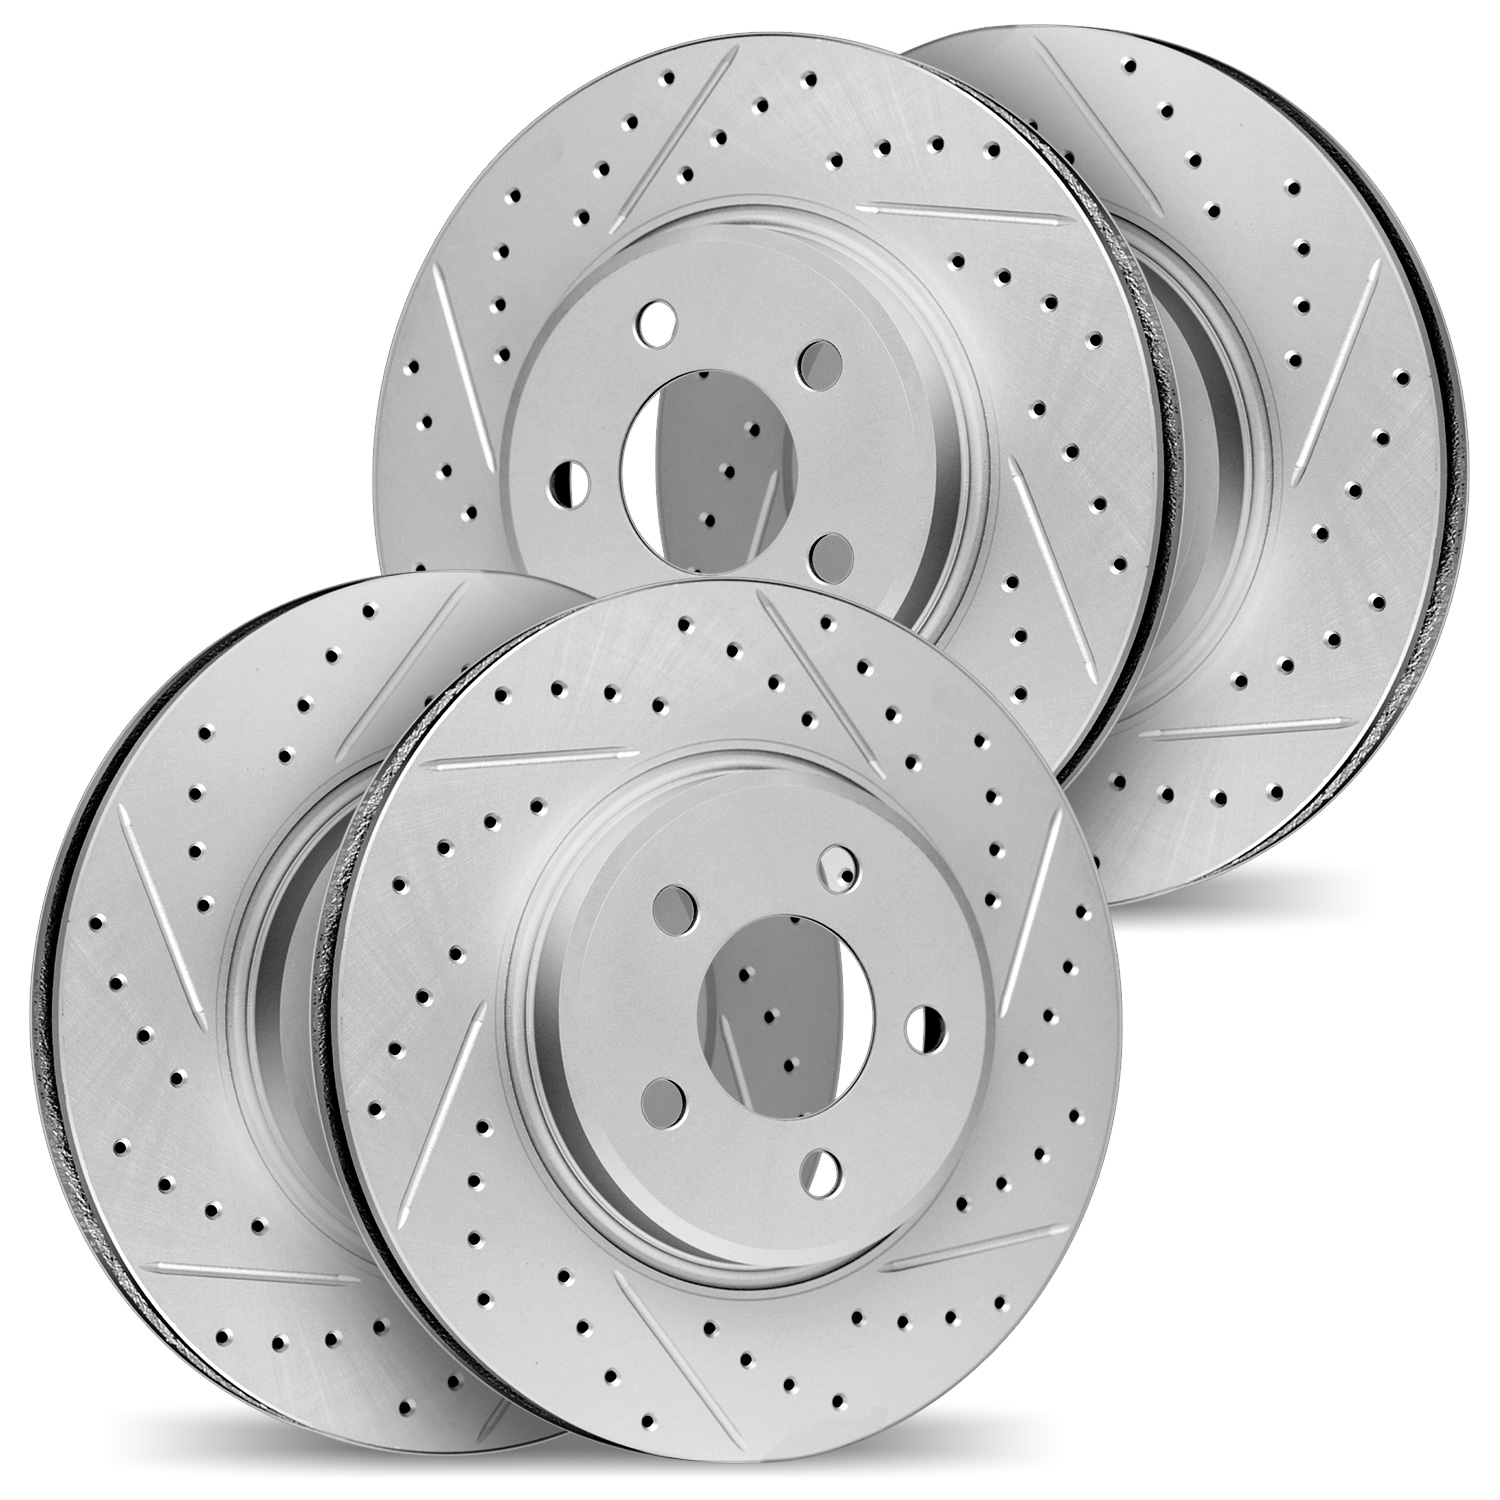 2004-80033 Geoperformance Drilled/Slotted Brake Rotors, 2004-2008 Ford/Lincoln/Mercury/Mazda, Position: Front and Rear